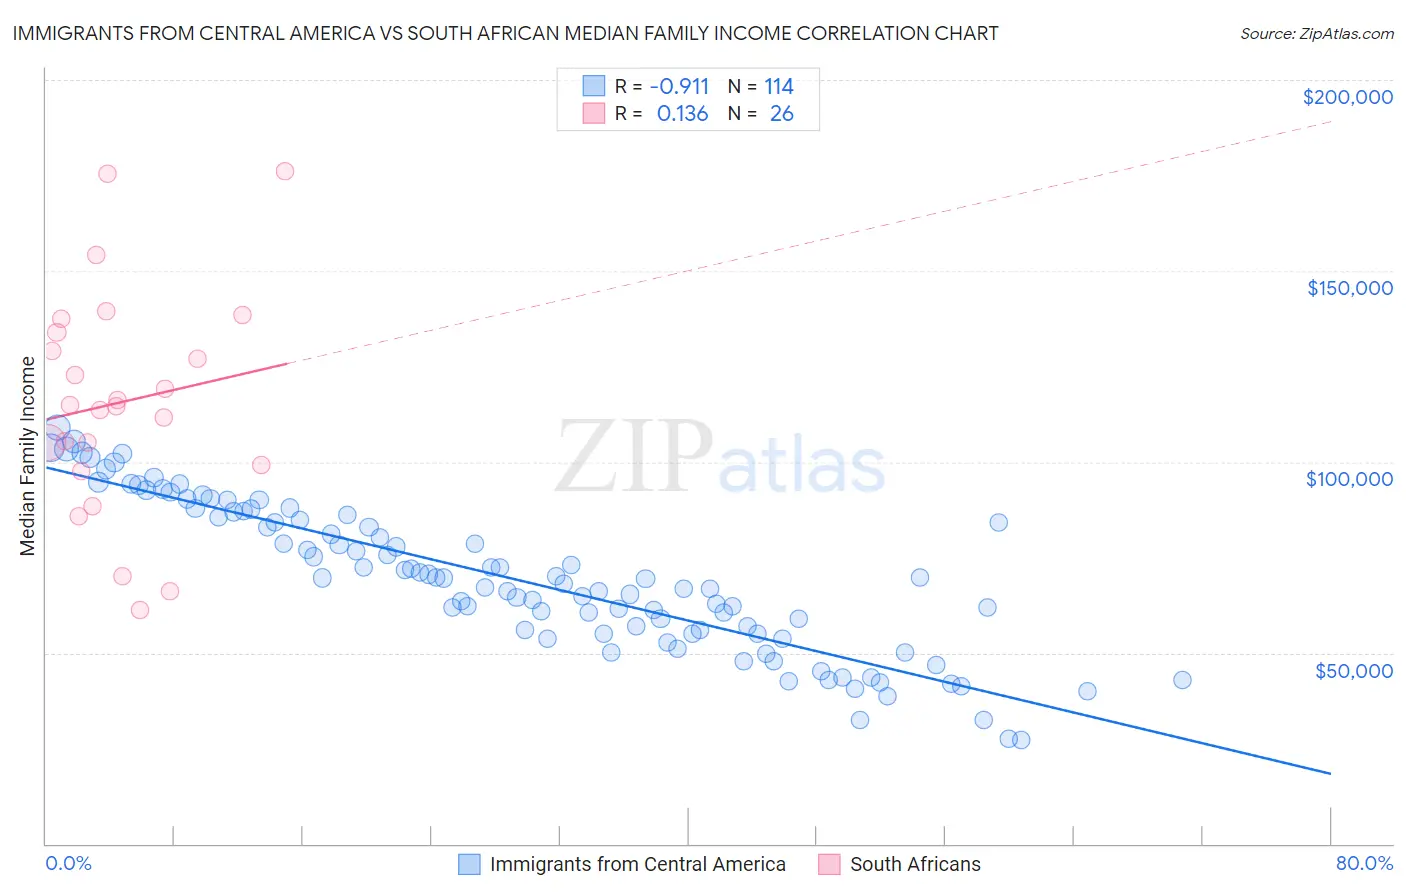 Immigrants from Central America vs South African Median Family Income